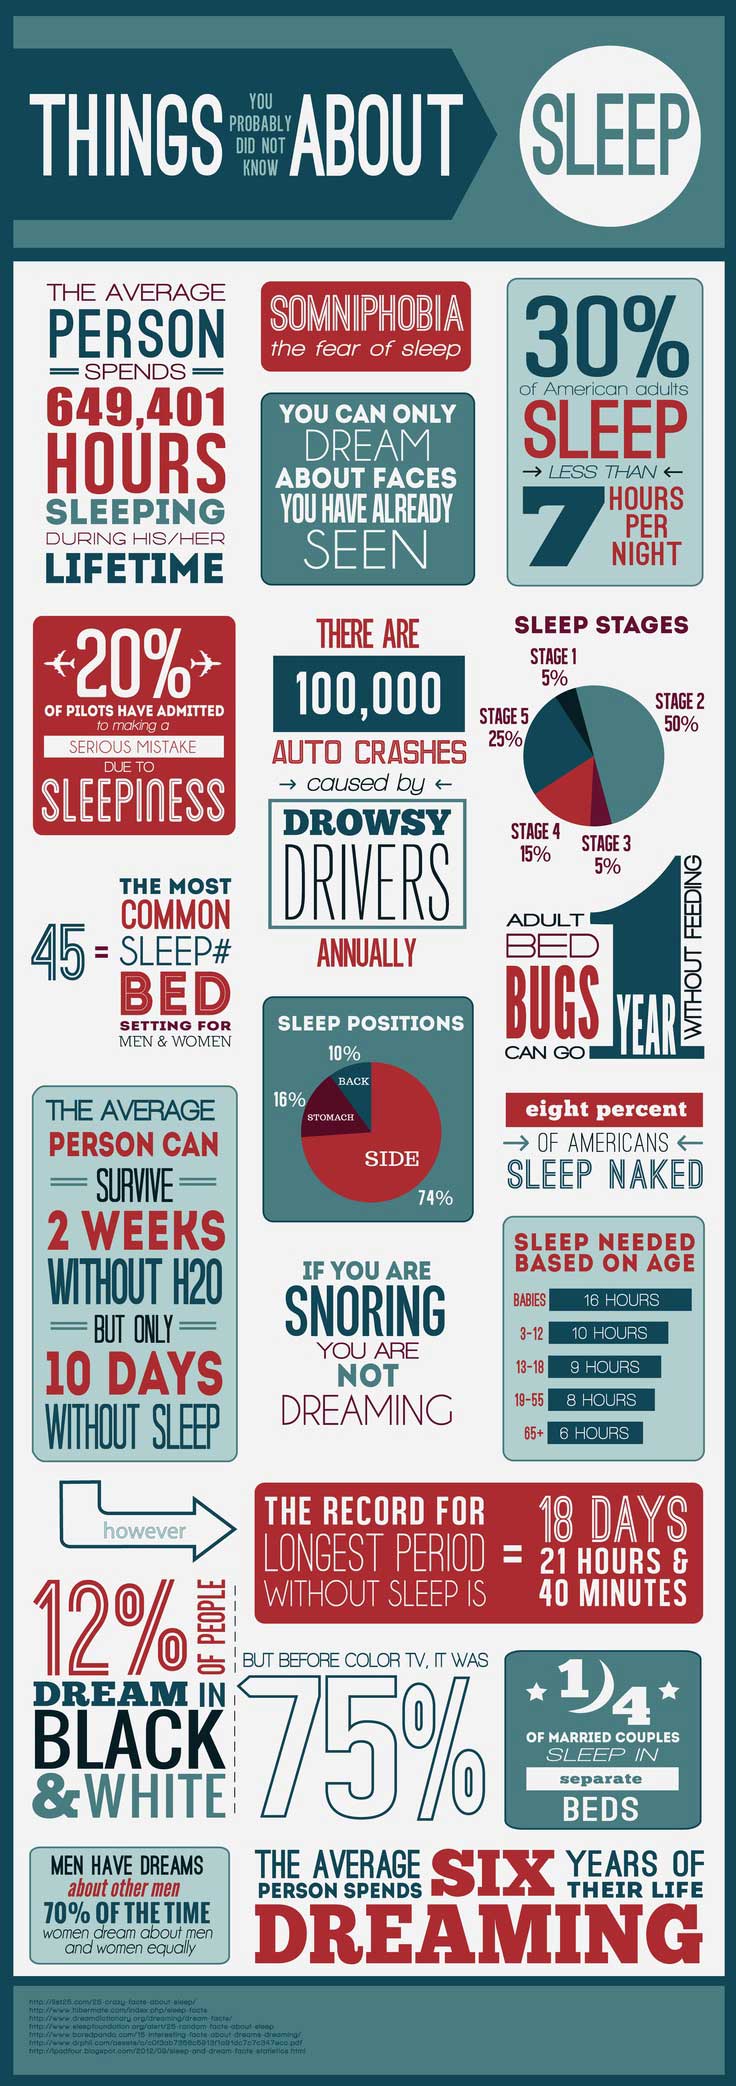 Things you didnt know about sleep infographic